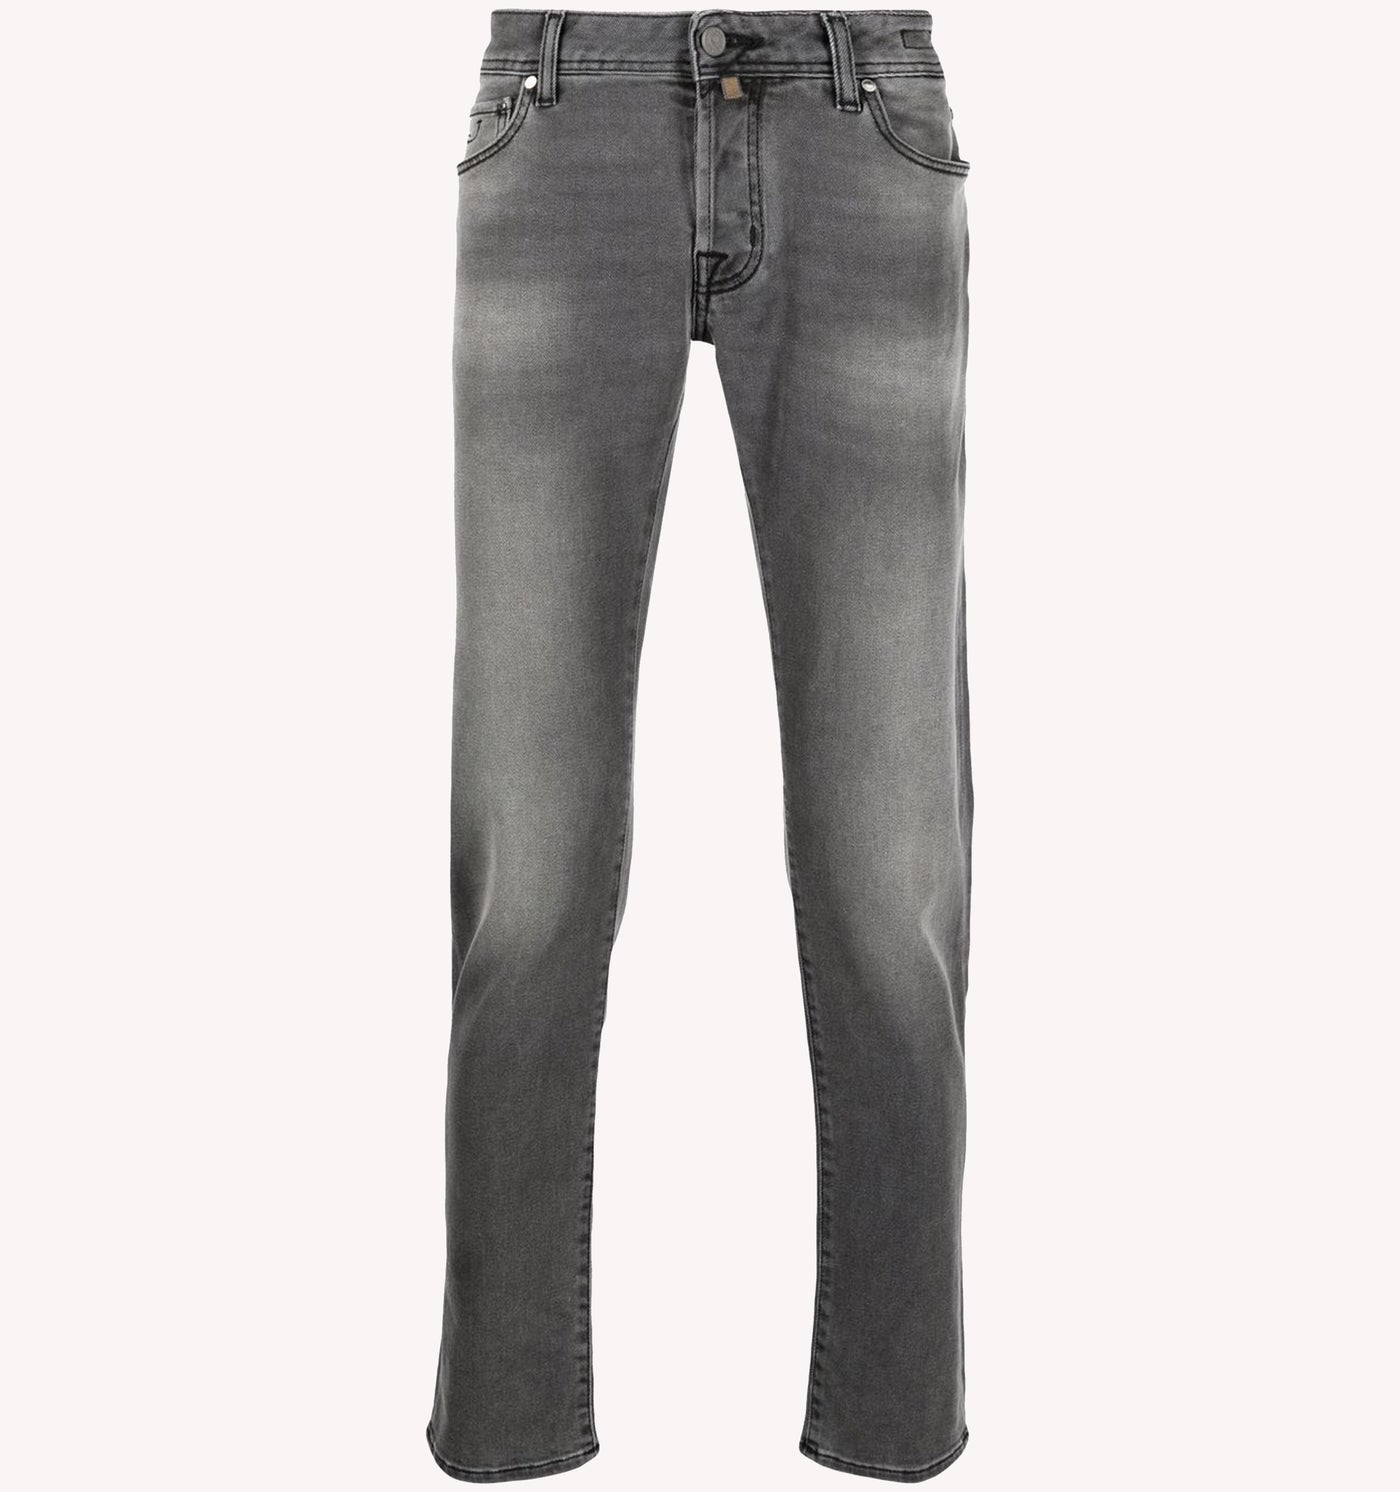 Jacob Cohen Straight Leg Jeans in Washed Black